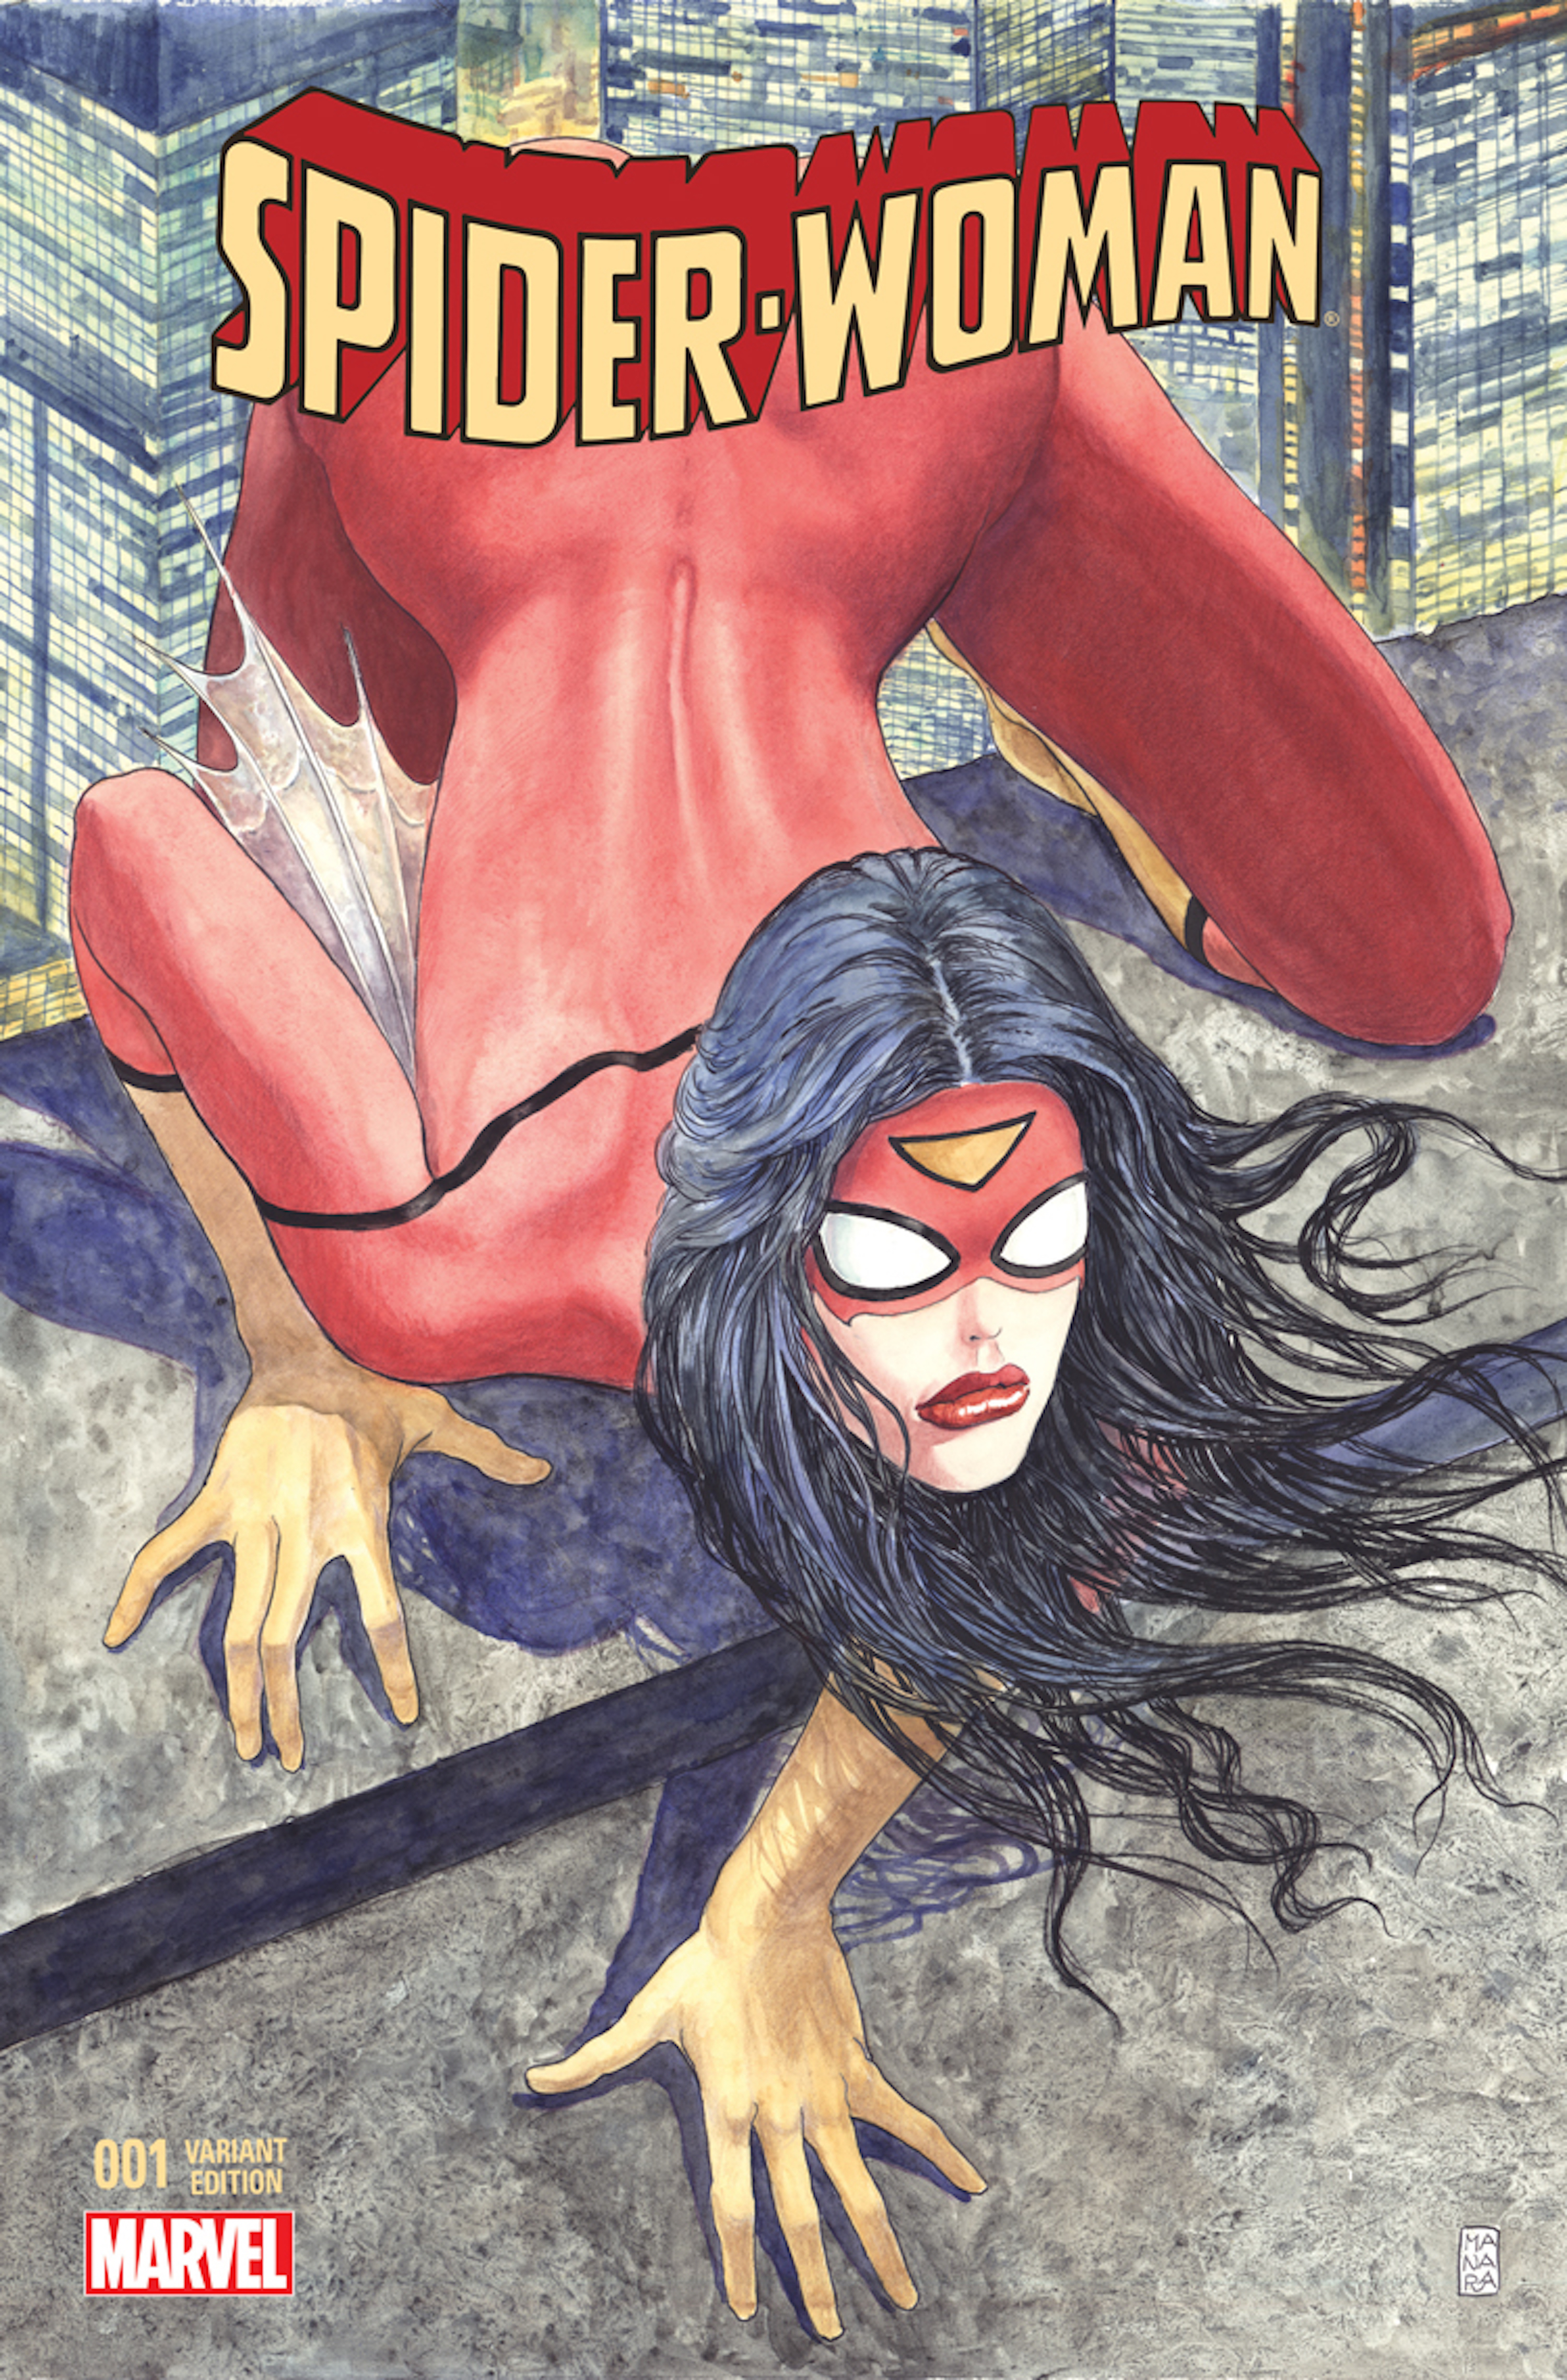 This image is the cover of Spider-Woman #1 (2014), and shows Spider-Woman scaling a building in a sexist crouch. 